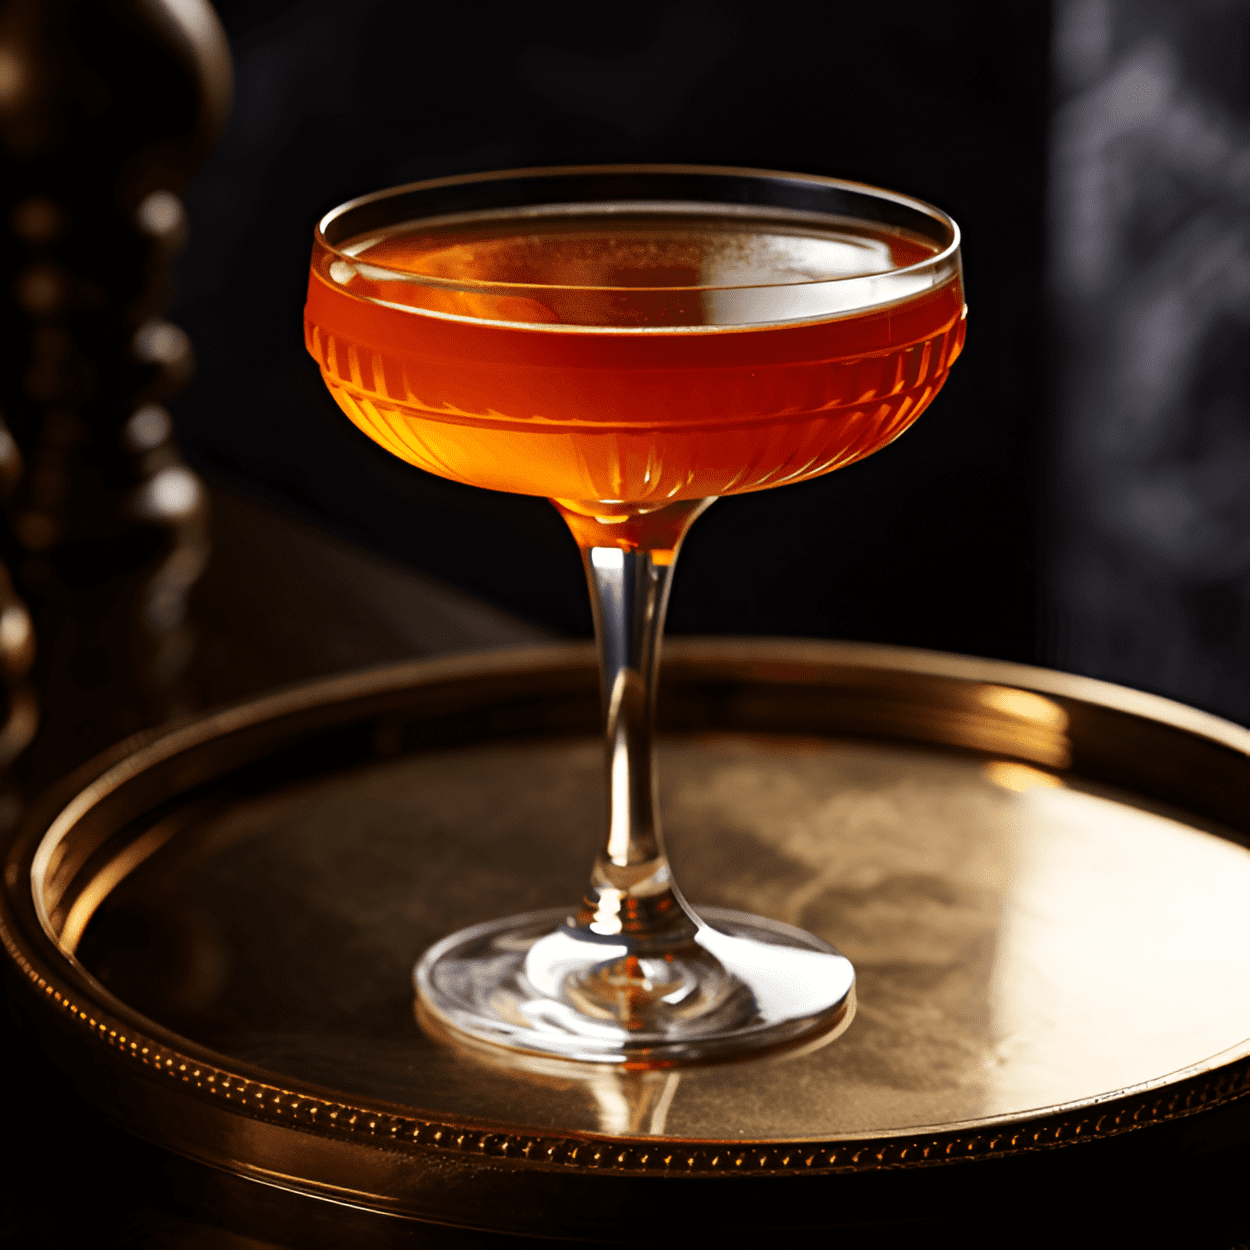 Mars Cocktail Recipe - The Mars Cocktail has a strong, bold flavor with a hint of sweetness. The combination of whiskey, vermouth, and cherry liqueur gives it a robust and complex taste. The addition of bitters adds a bit of a kick, making it a cocktail that is sure to wake up your taste buds.